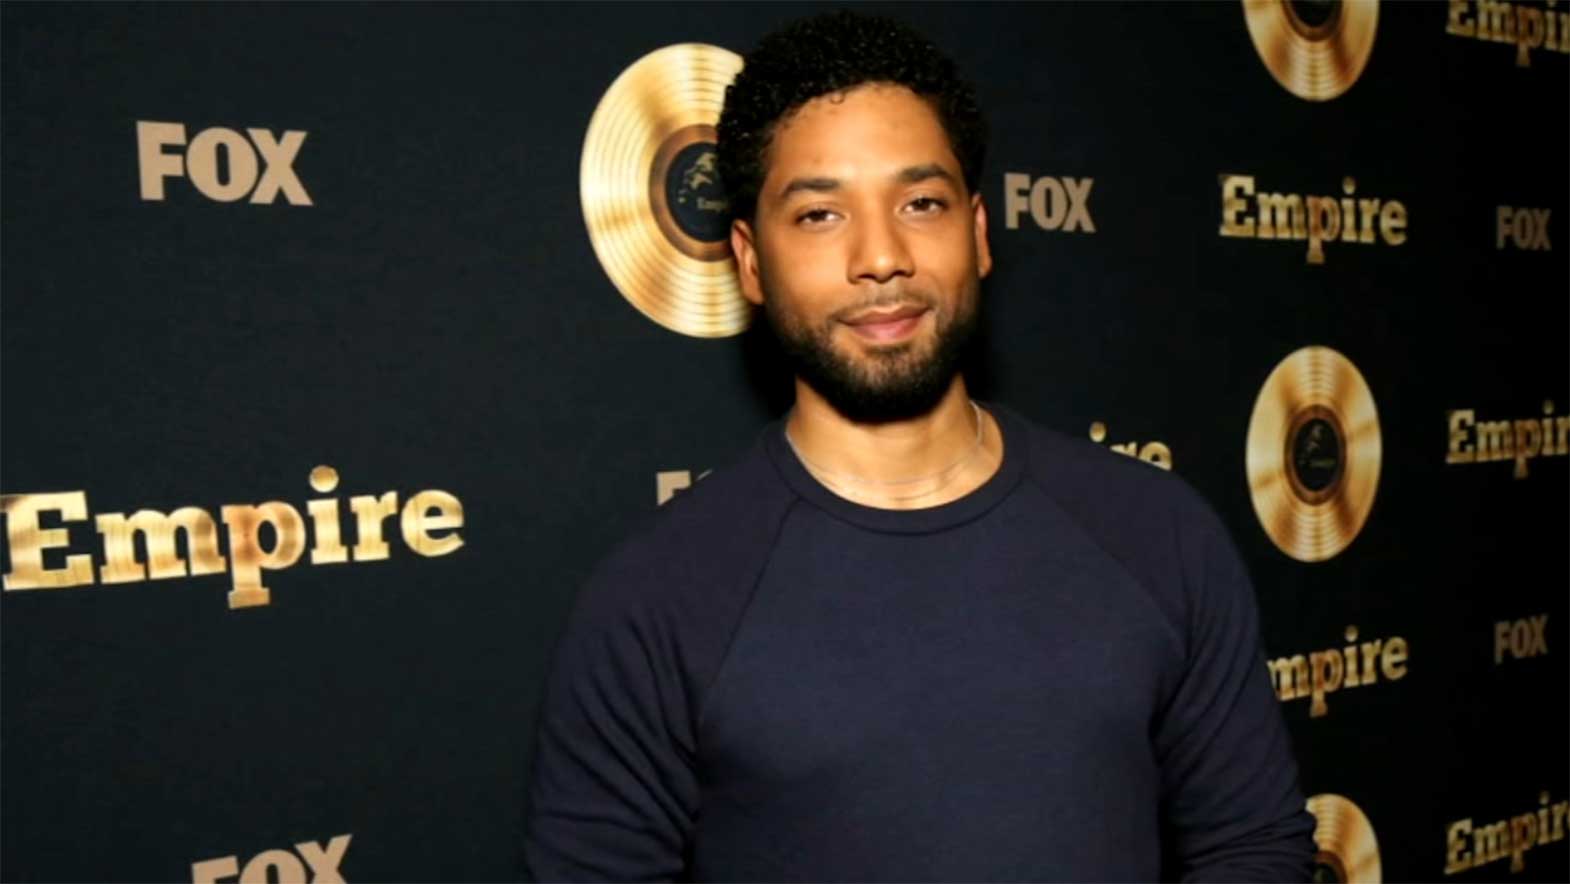 Police Slam US Actor Jussie Smollett, Say He Staged Racist Attack to Boost Career